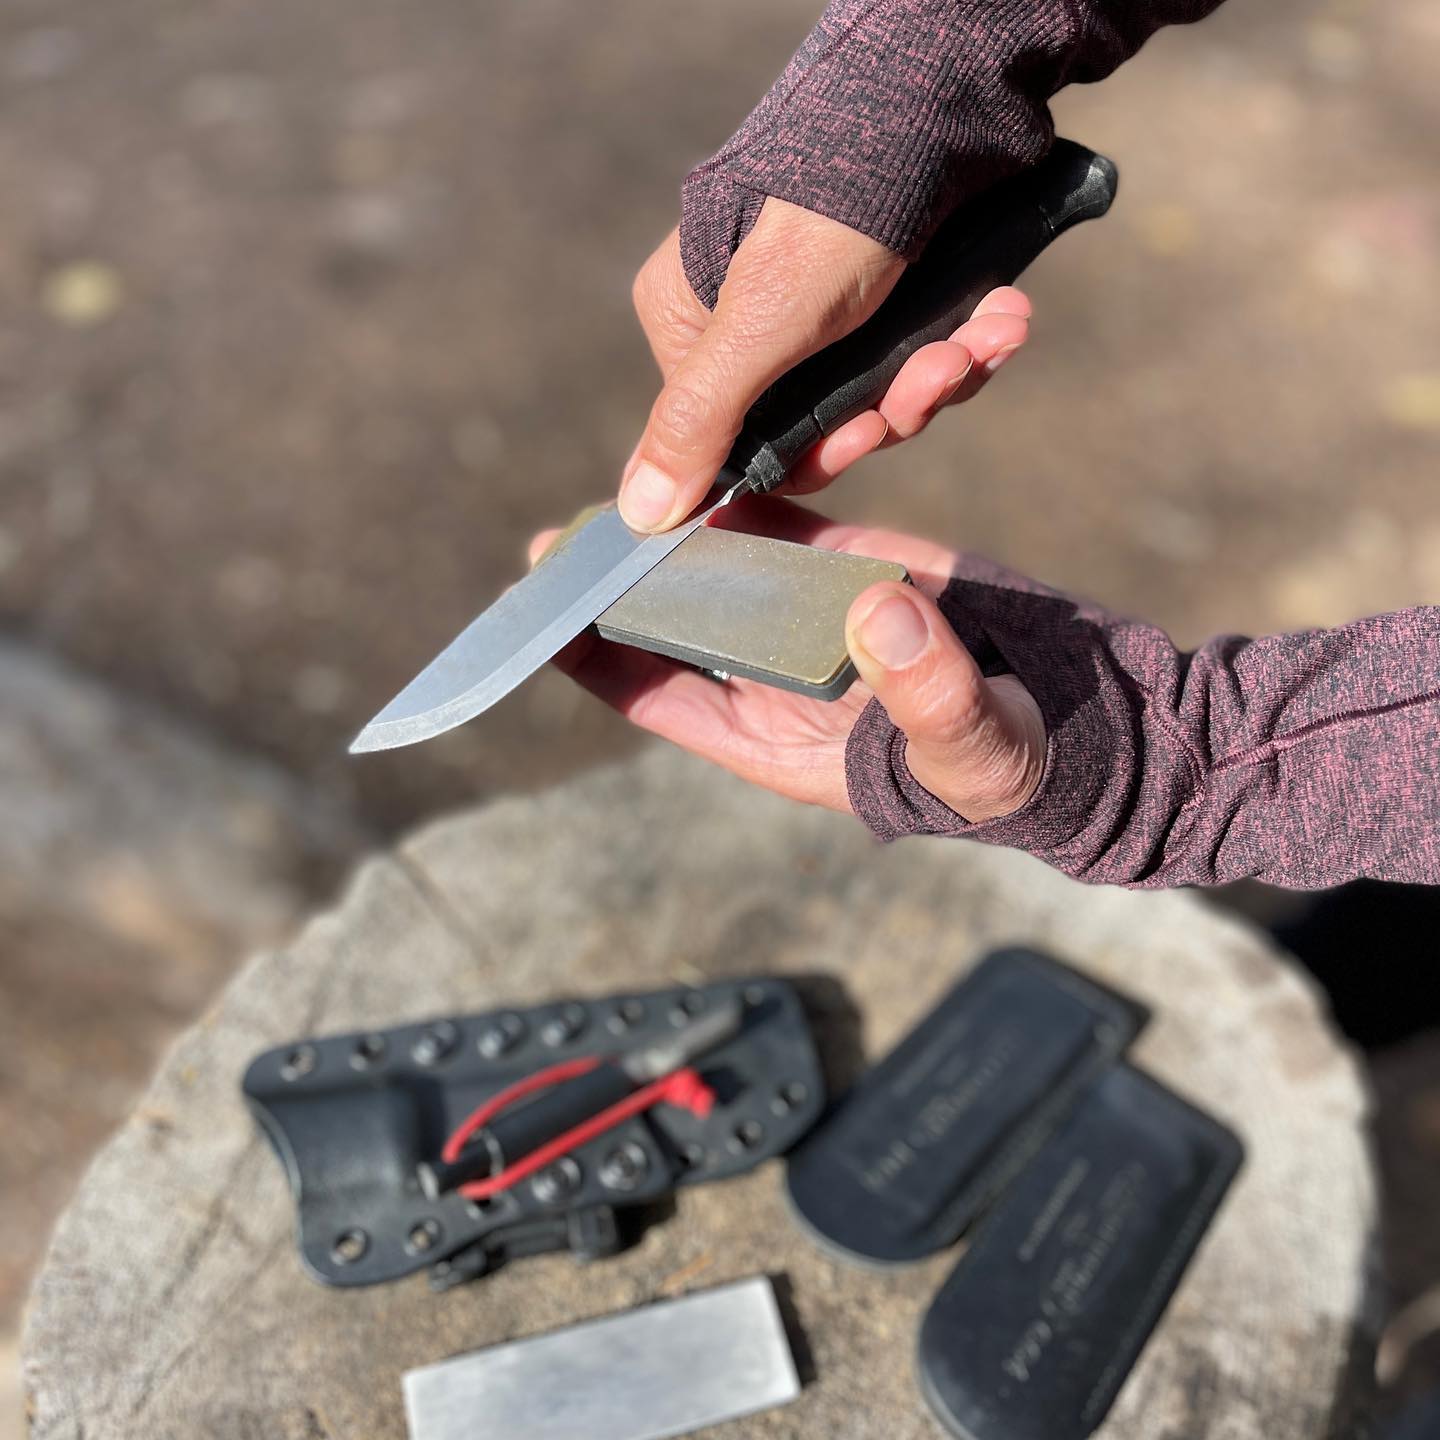 Why a Knife is Not Your Most Important Survival Tool: A COMPARISON OF SKILLS AND TOOLS IN REAL-LIFE SCENARIOS